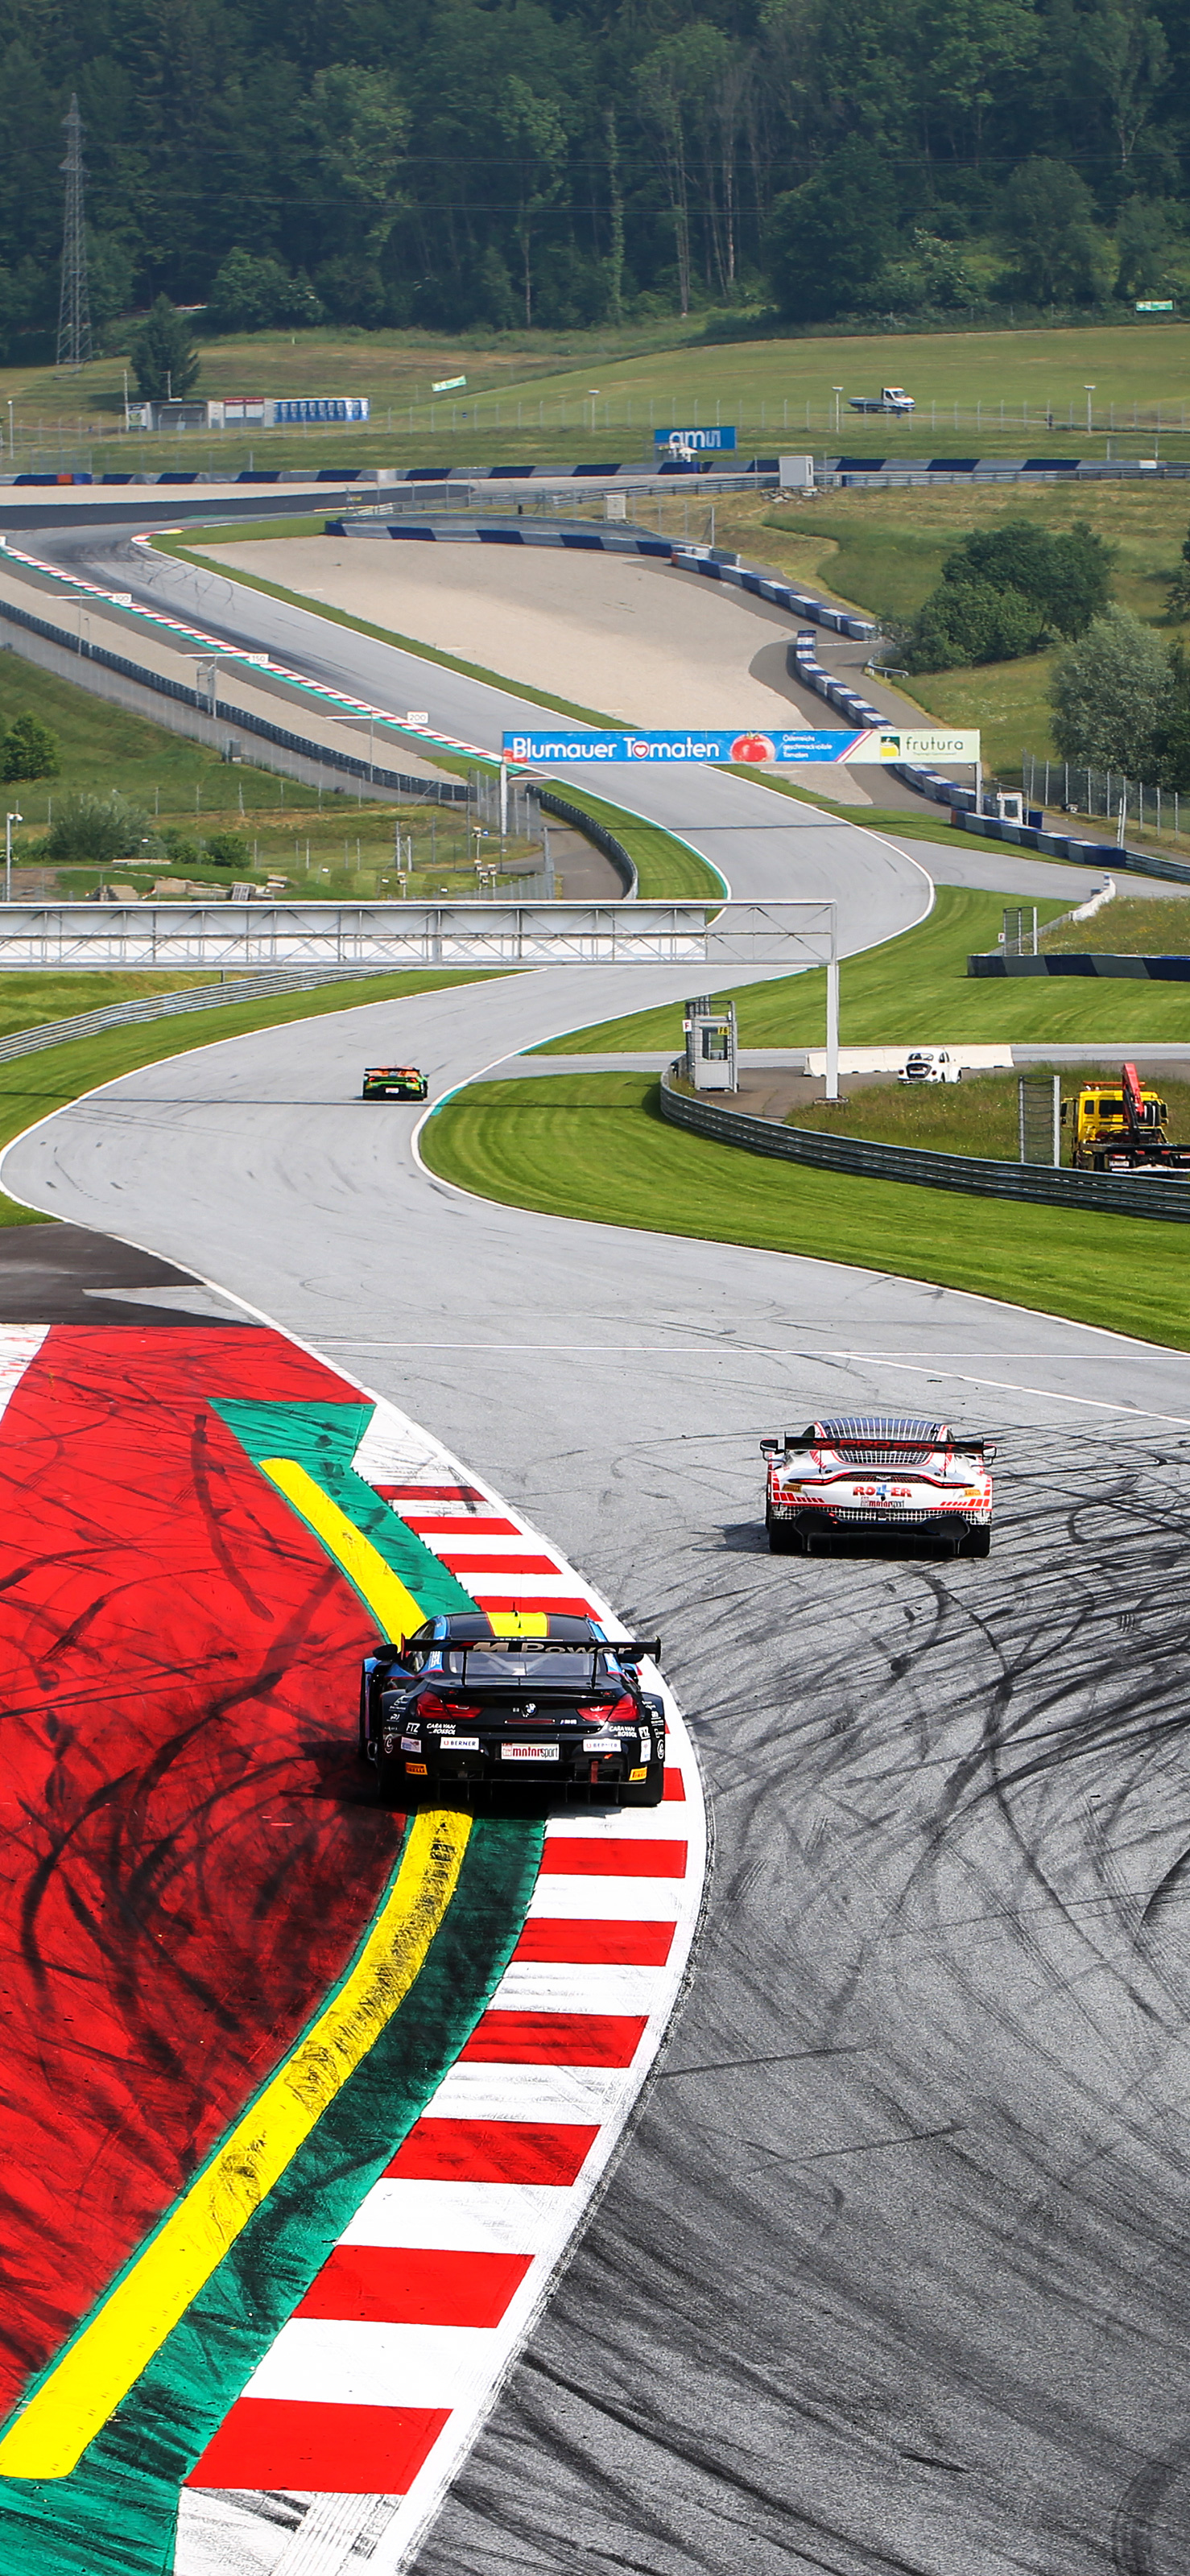 Auto Racing: Racing circuit, Road racing competition, Speed, Defined start-finish lines. 1480x3200 HD Background.